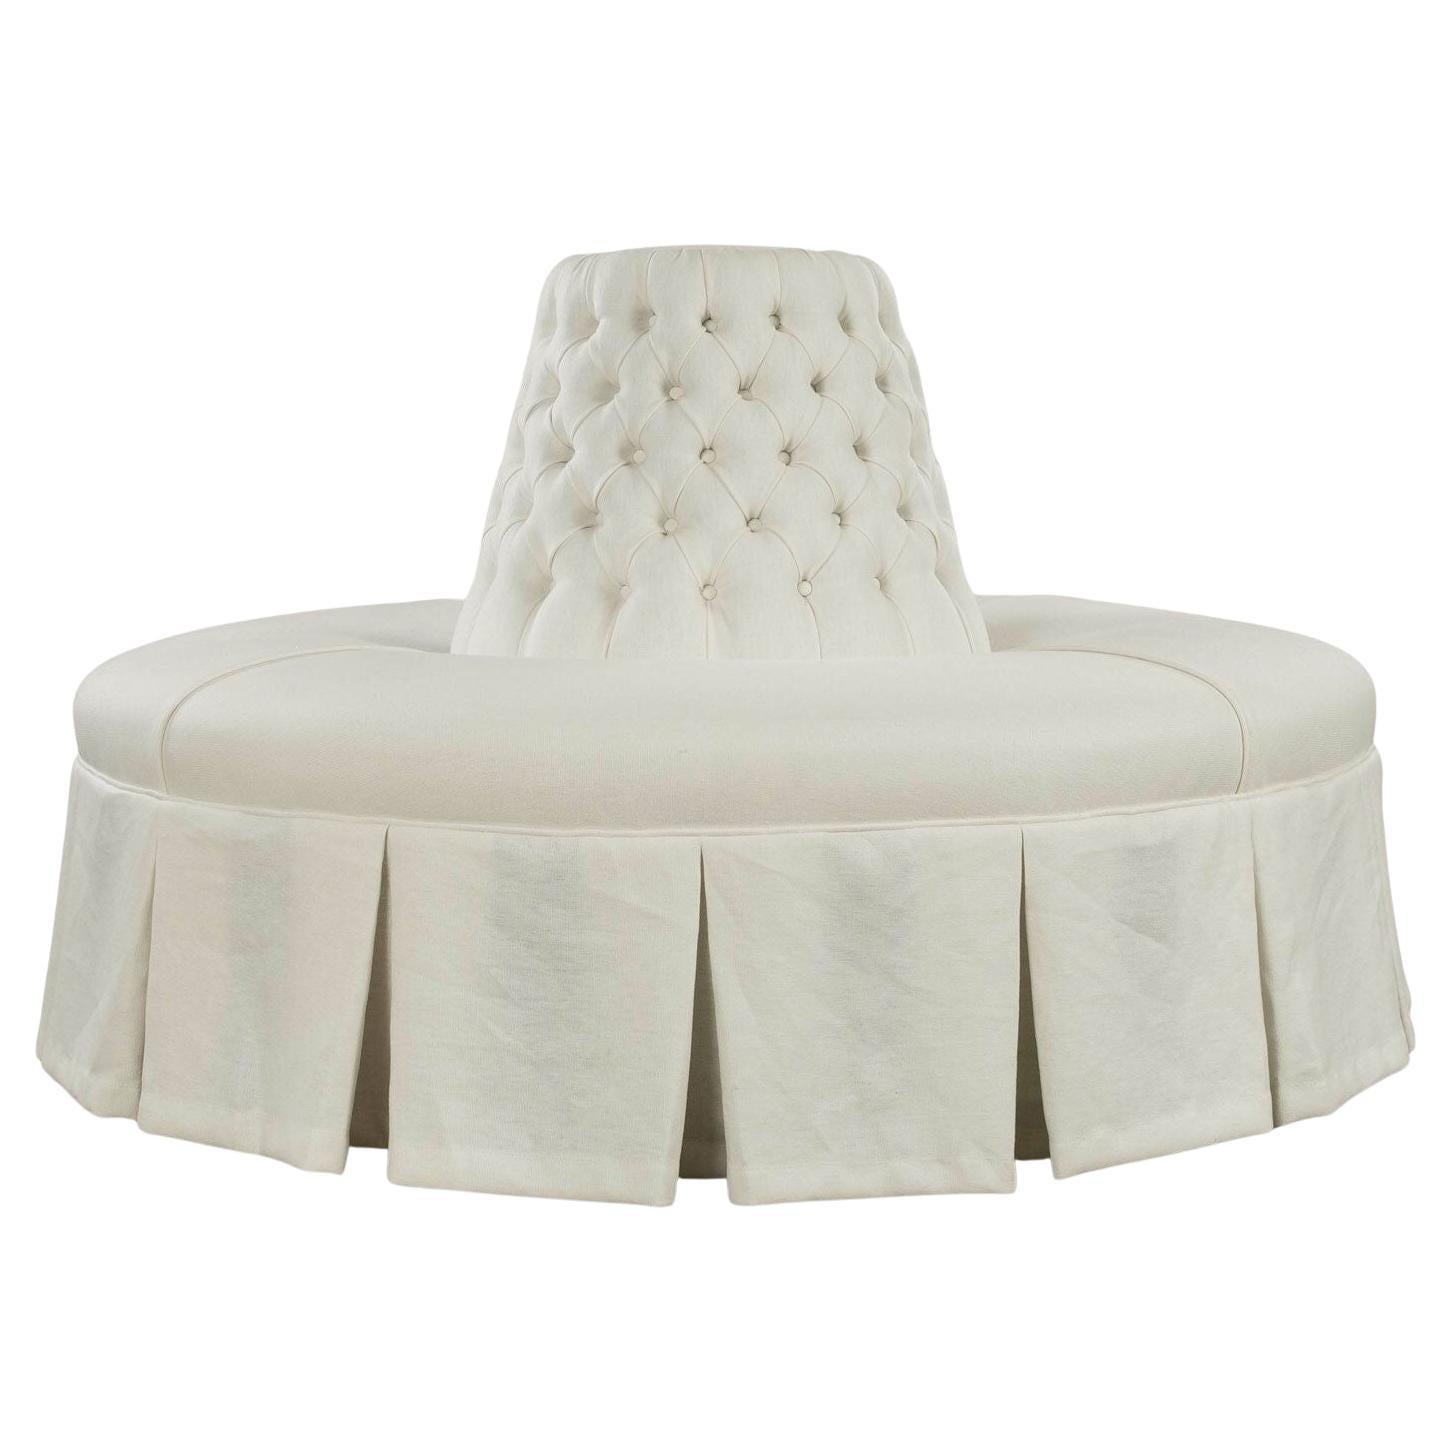 Large Round White-Linen Upholstered Banquette